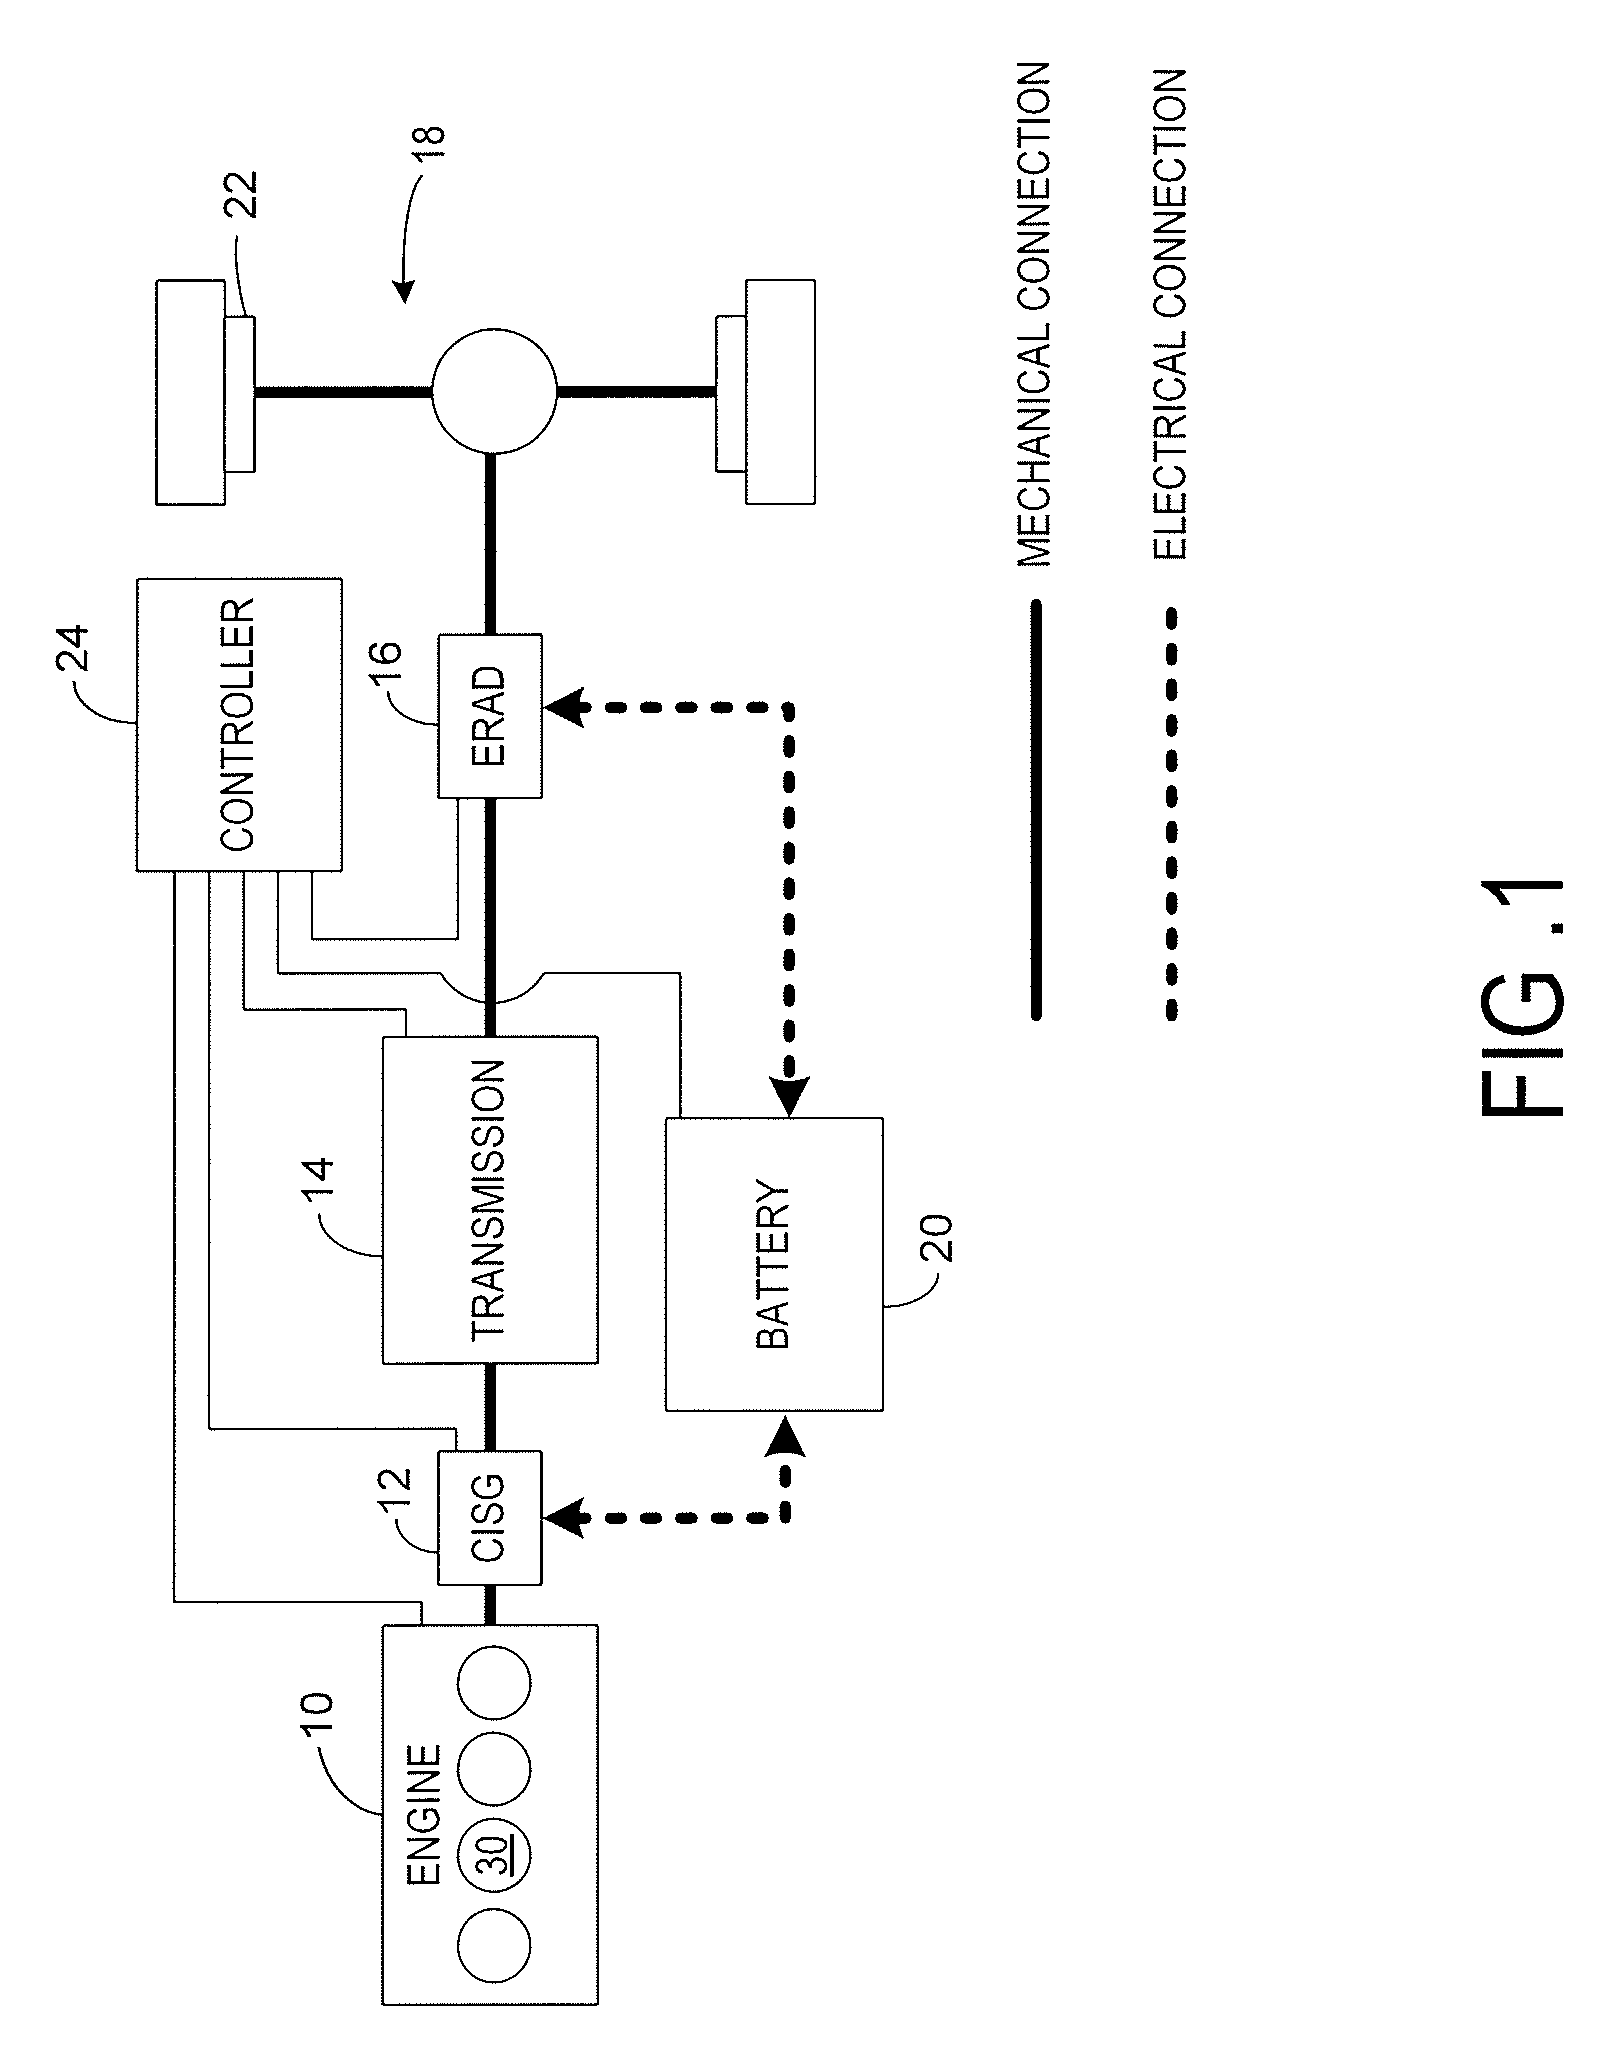 System and Method of Extending Regenerative Braking in a Hybrid Electric Vehicle